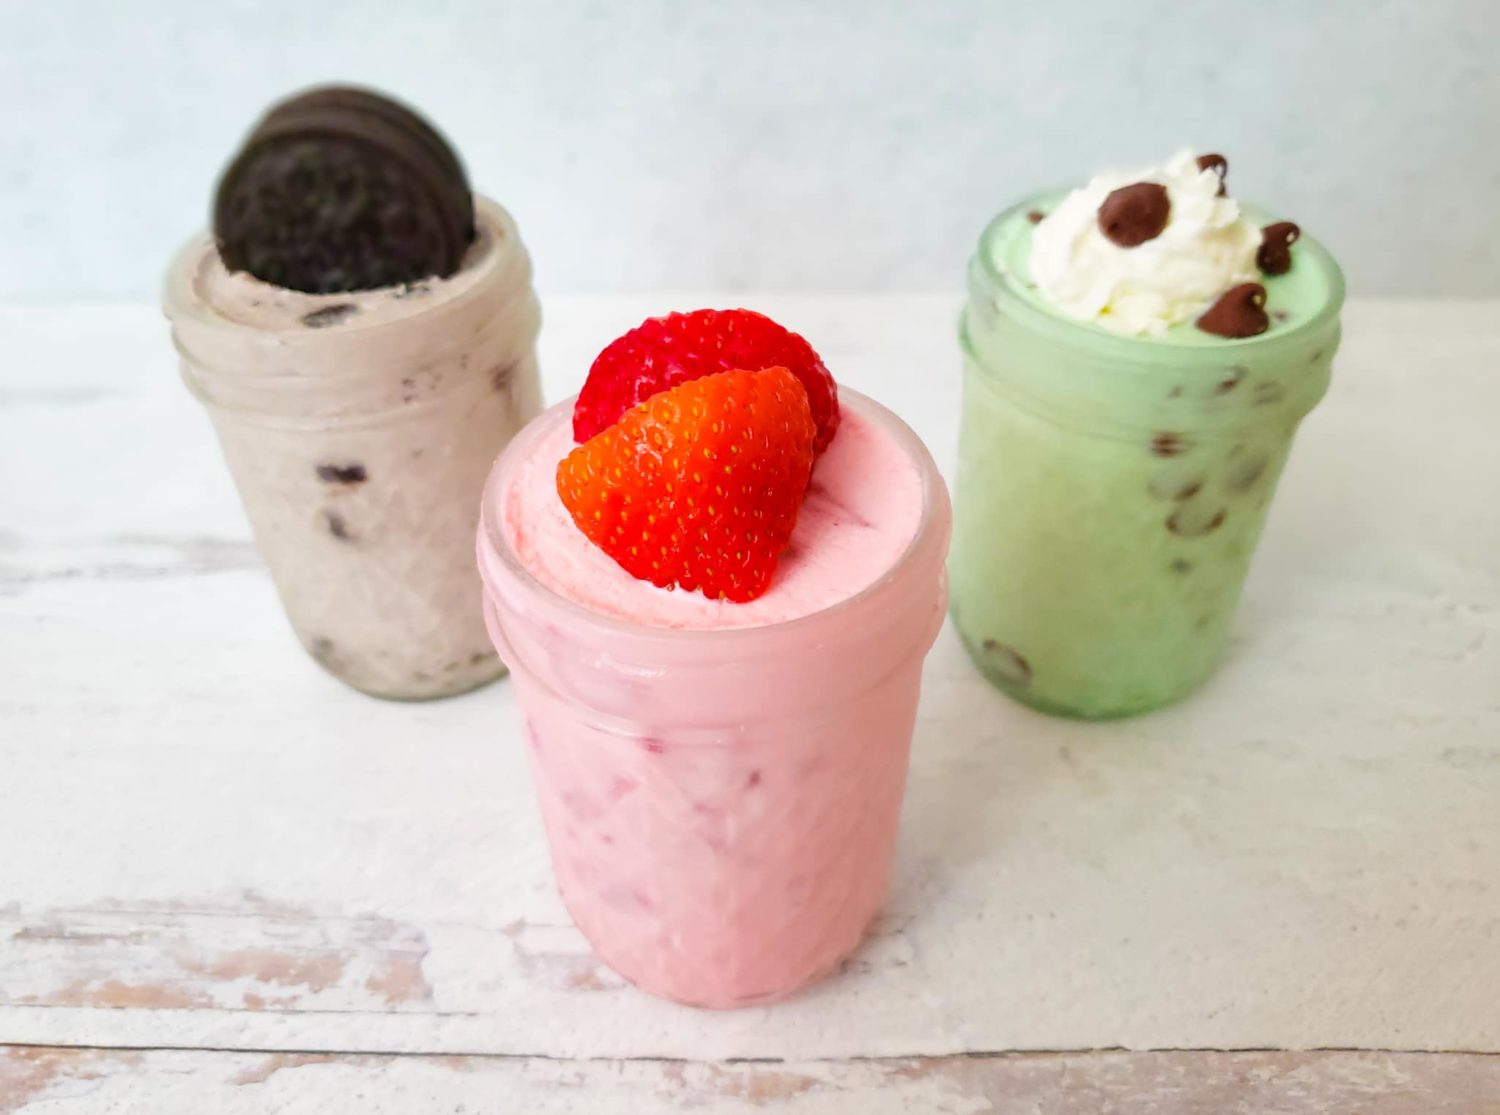 3 small mason jars of ice cream - one with an oreo on top, one with strawberries on top and one with whipped cream and chocolate chips